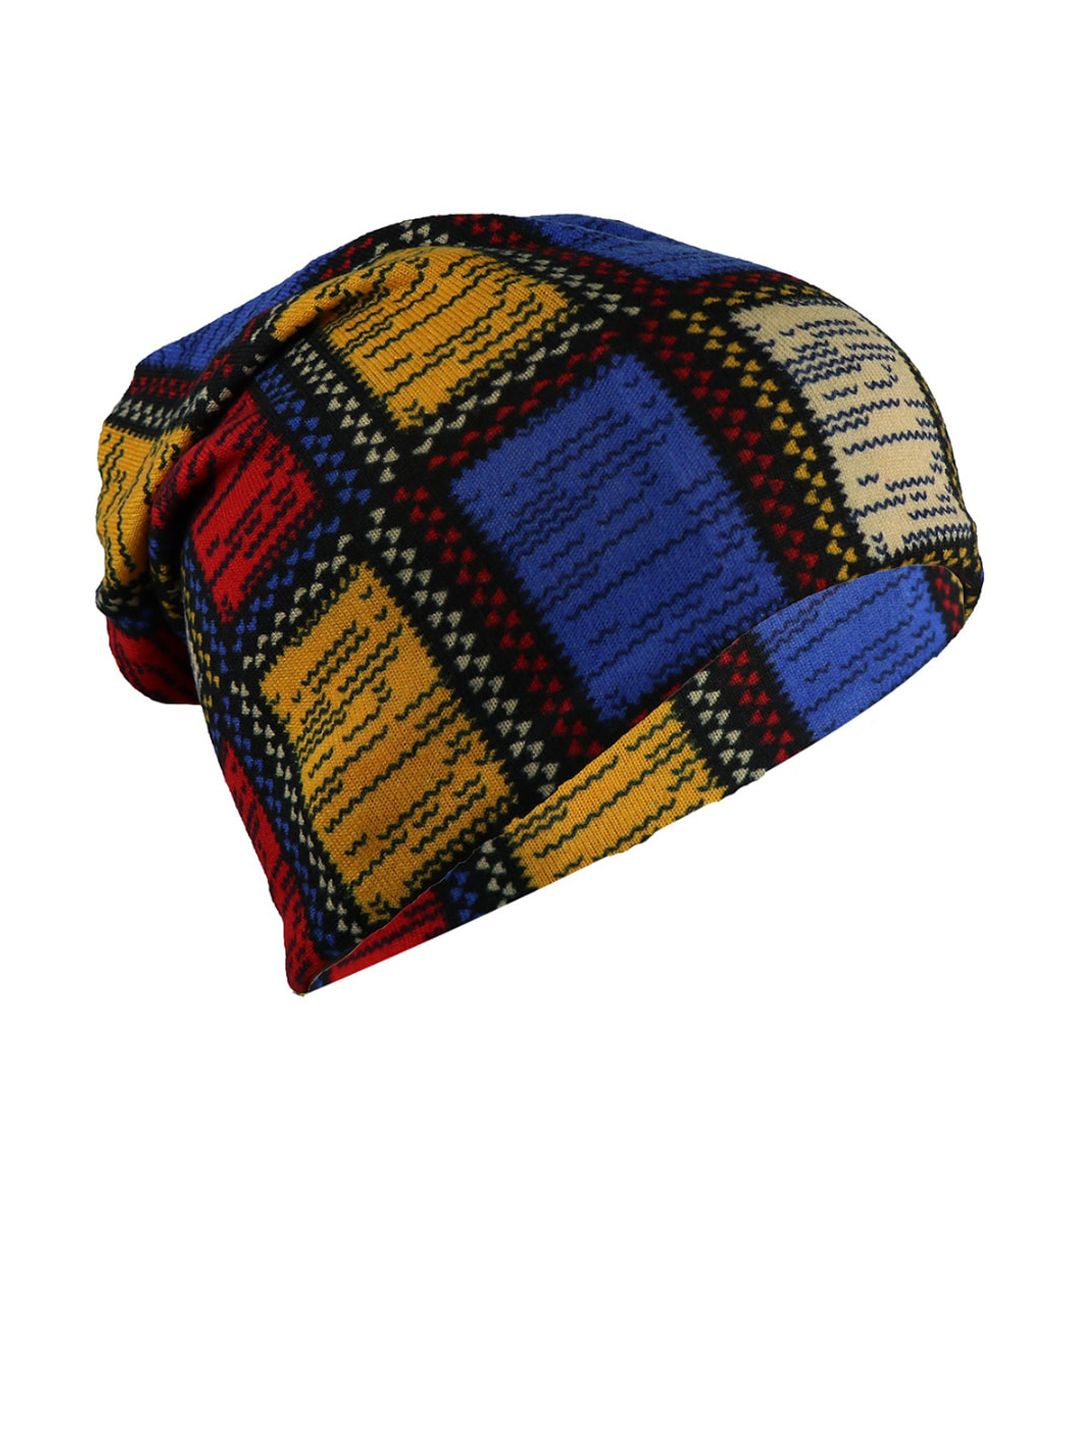 iSWEVEN Unisex Multicoloured Printed Beanie Price in India